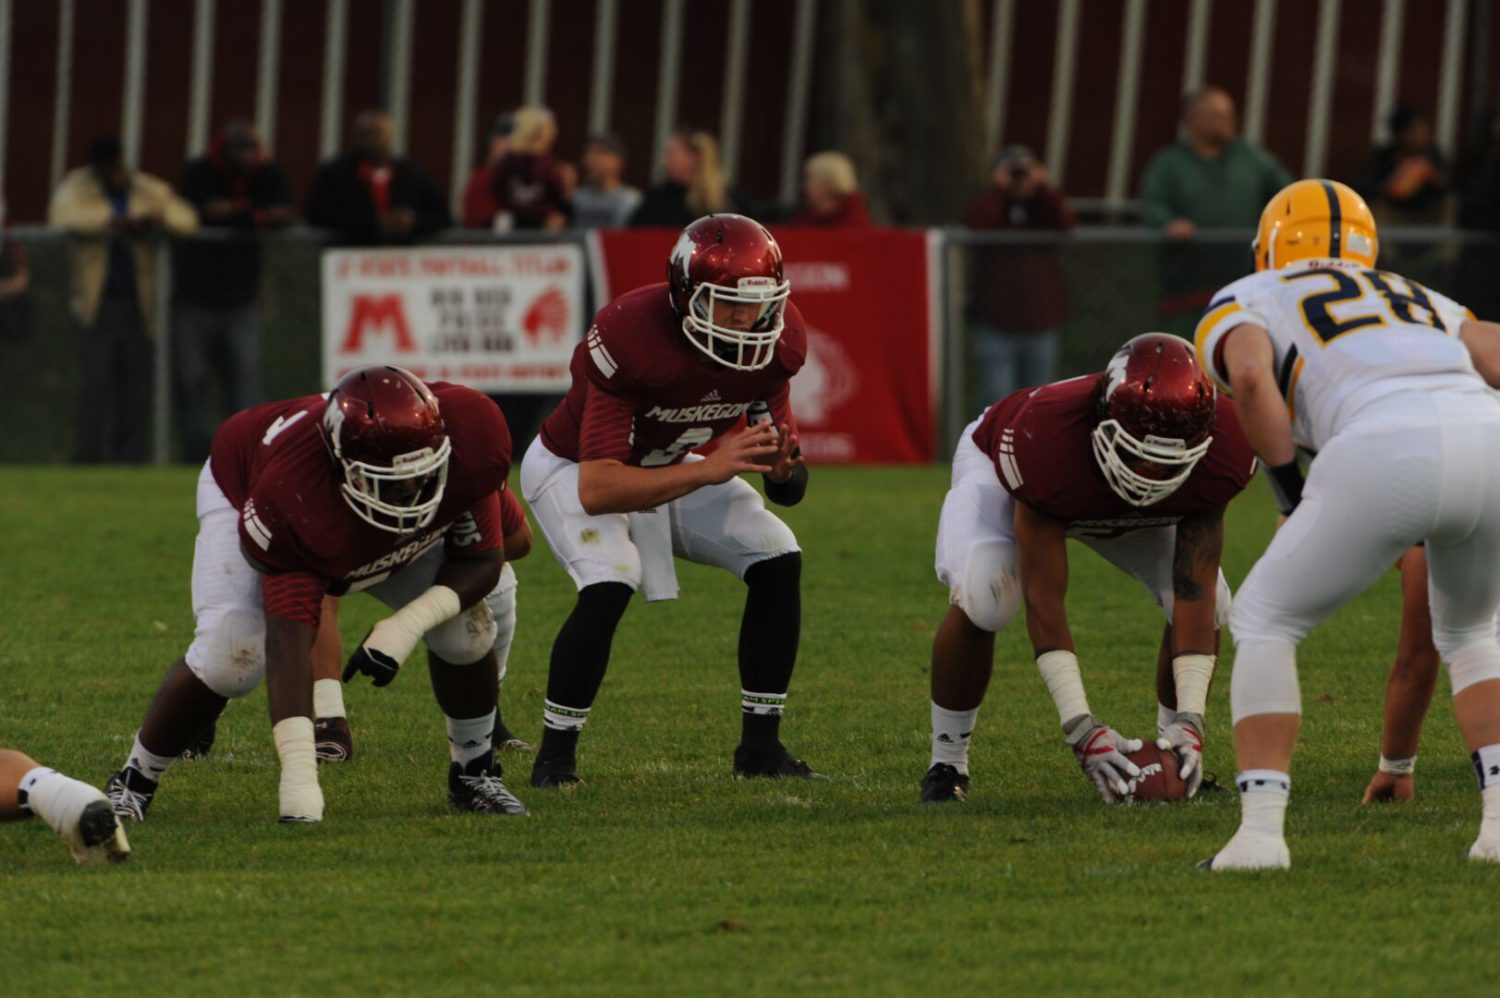 Big plays, defense highlight Muskegon’s 37-7 win against East Grand Rapids